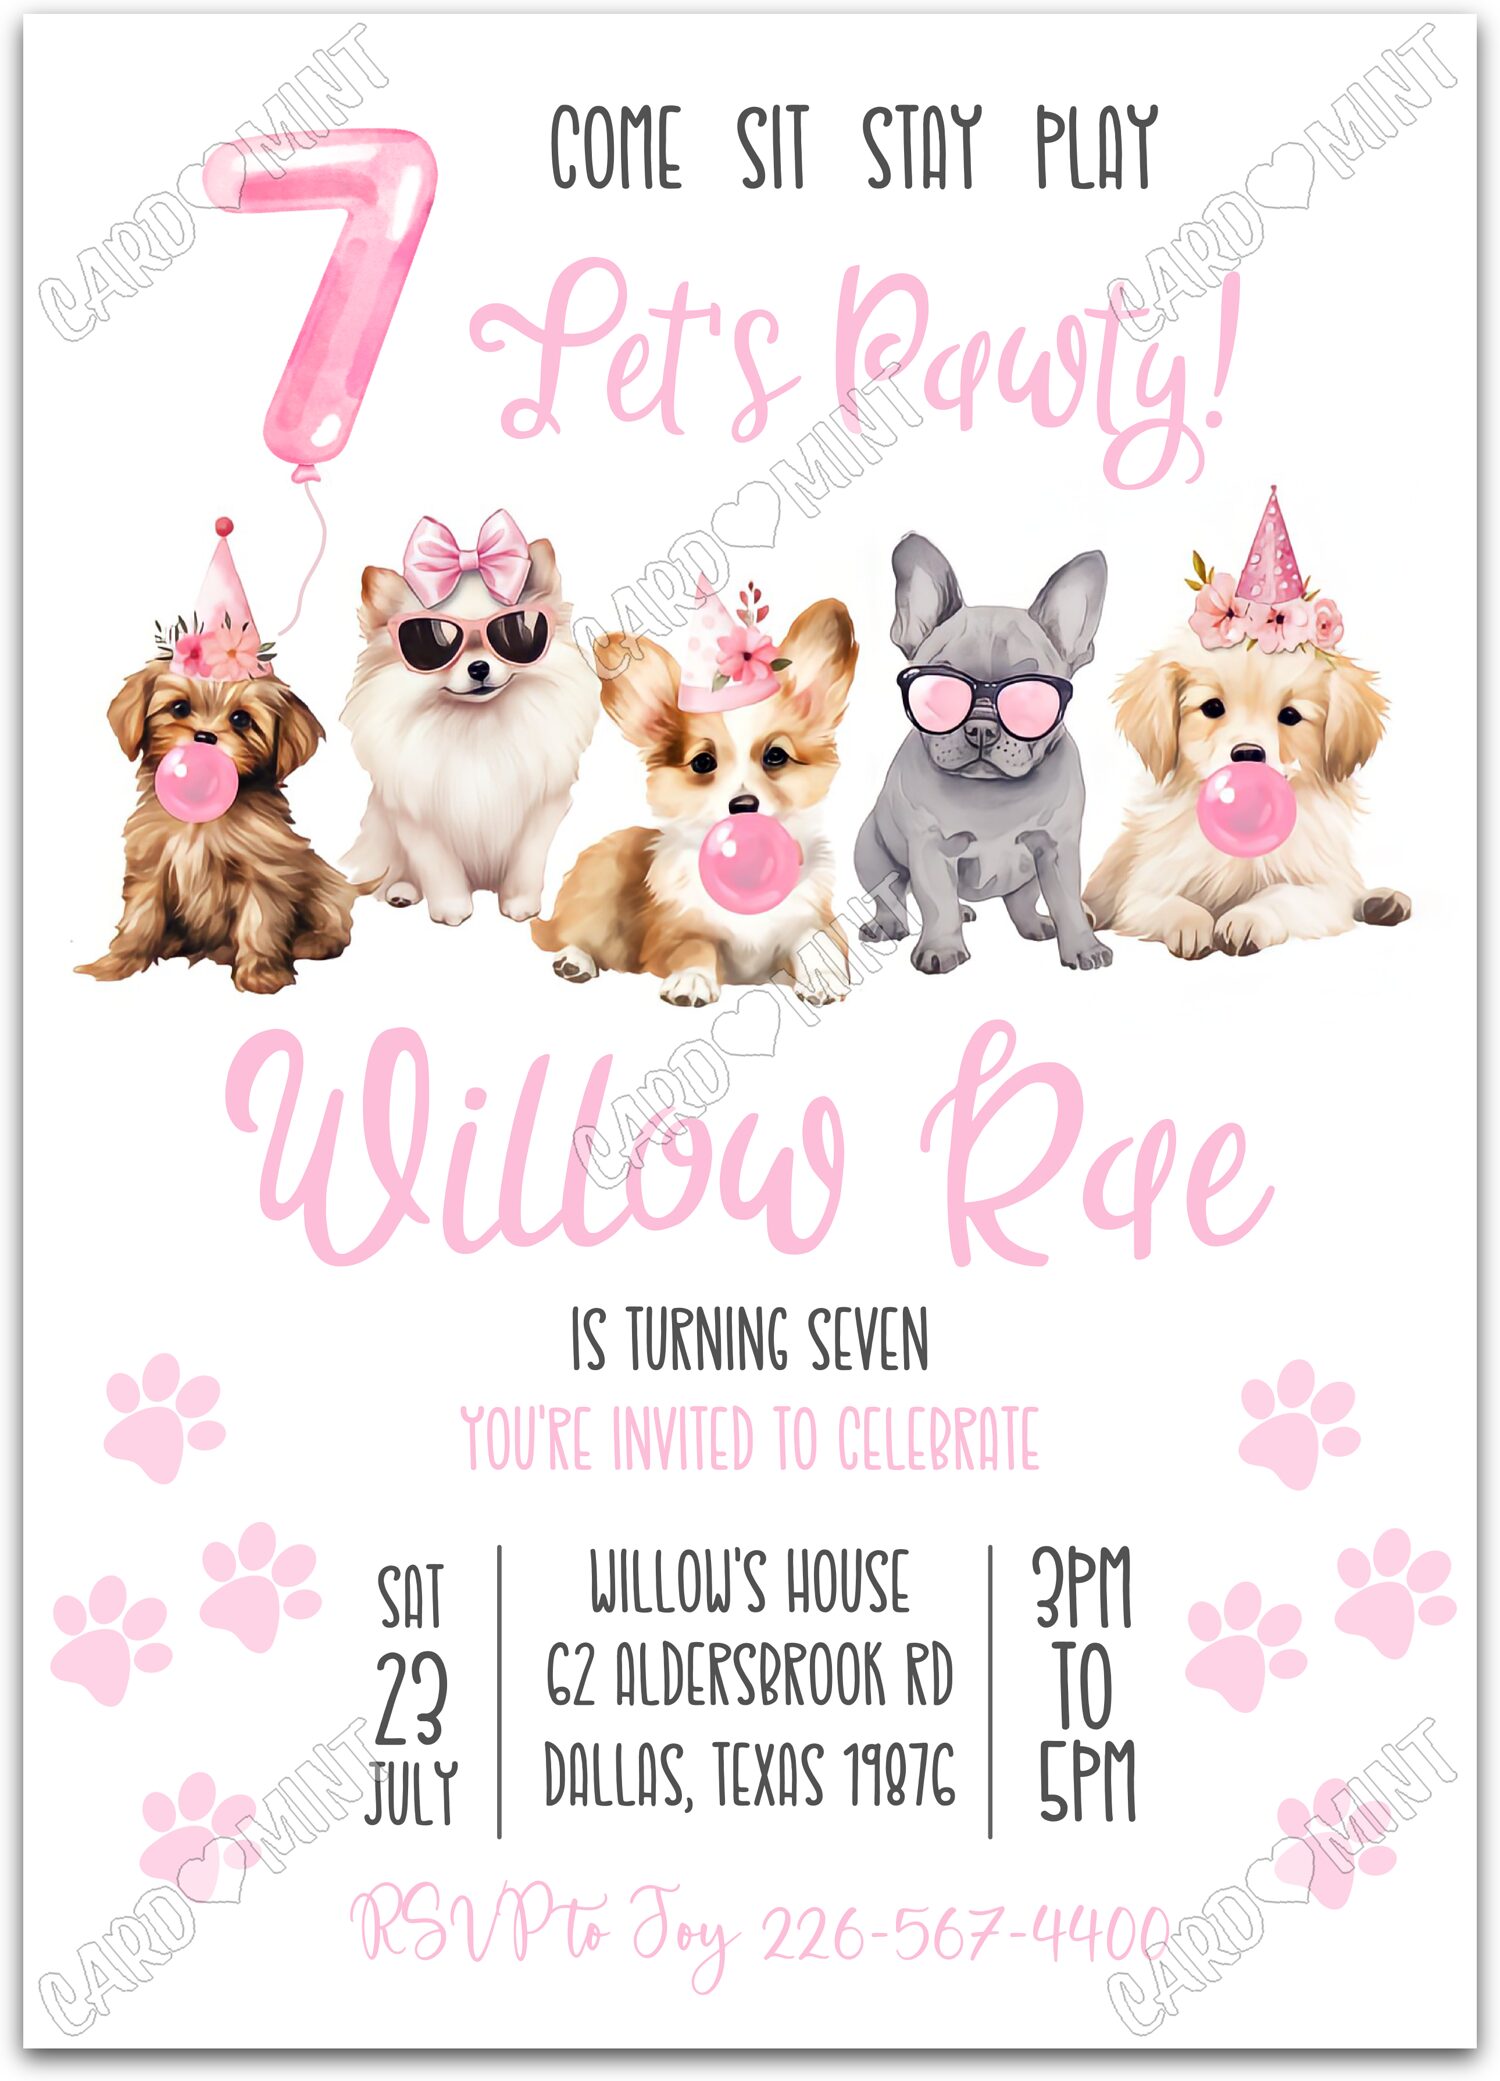 Editable Let's Pawty pink puppies blowing bubbles girl 7th Birthday Party 5"x7" Invitation EV2041-7